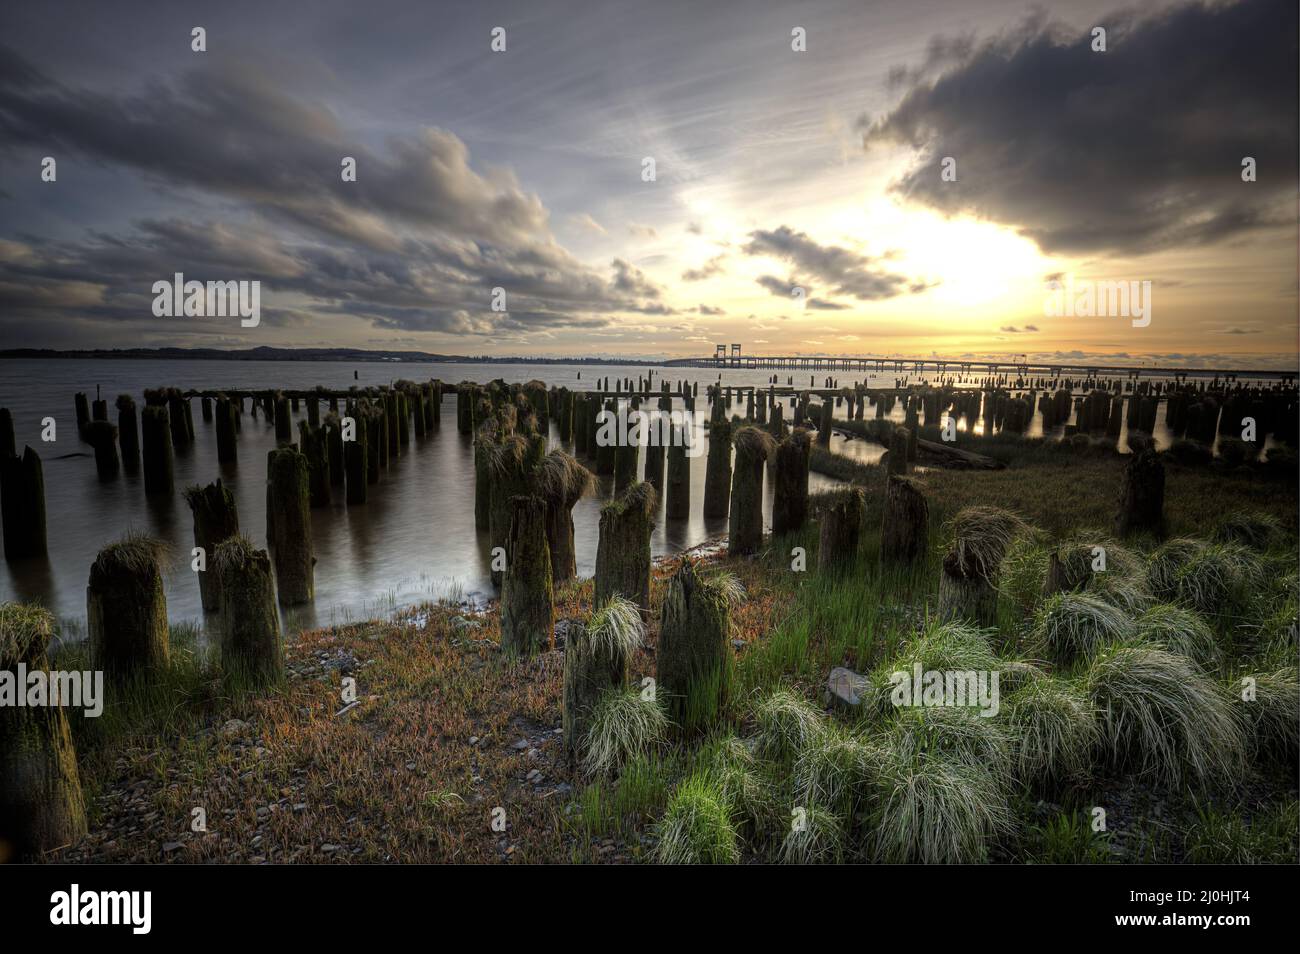 Wood pilings at sunset in Oregon. Stock Photo